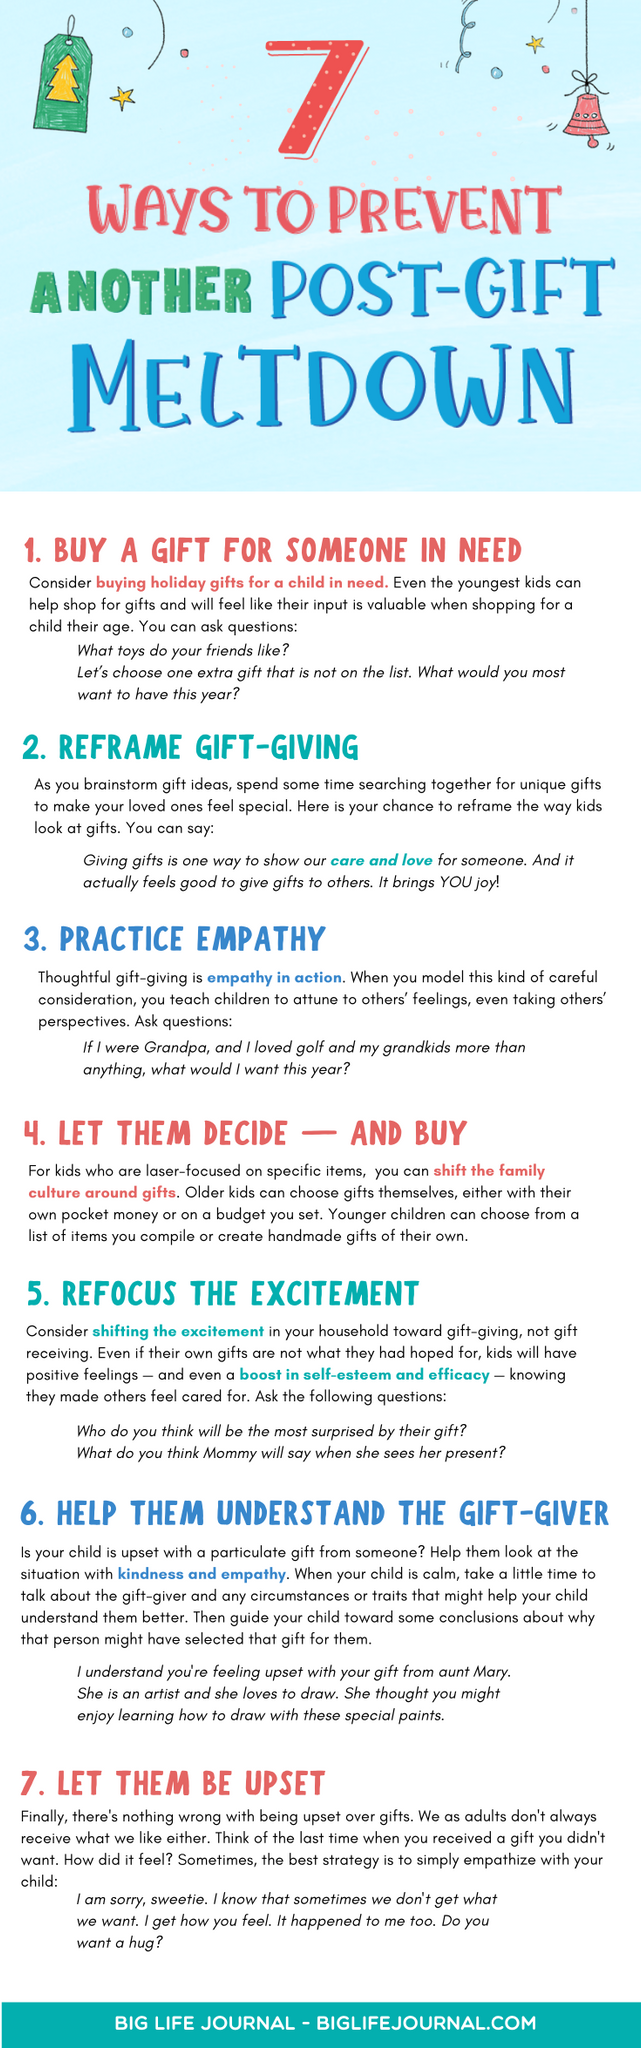 https://cdn.shopify.com/s/files/1/2013/0229/files/7_Ways_to_Prevent_Another_Post-Gift_Holiday_Meltdown_Infographic_2048x2048.png?v=1608472882